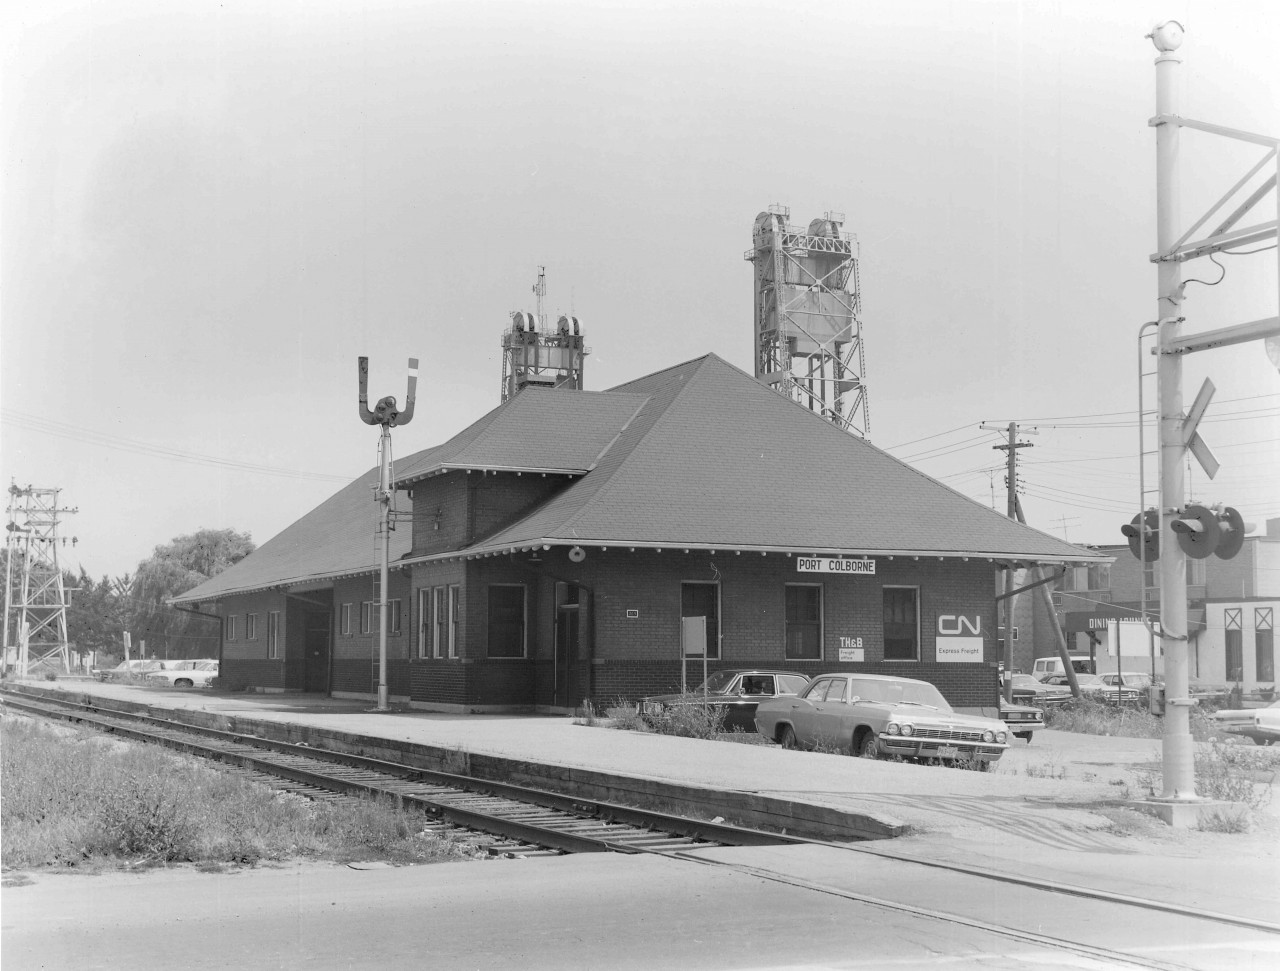 The utilitarian Port Colborne station completed in 1925, replaced a much more interesting building that was demolished to make way for the Fourth Welland Canal construction.  By the time this photo was taken the building housed both the CN Express Freight and the TH&B Freight office (originally at King and Clarence - 2nd floor). Contrast this with Arnold Mooney's photo taken 3 years later and you can see the Station Order Signal in his 1975 shot was moved to the north side of the tracks, and the Bridge #20 Semaphore was replaced by Search Lights http://www.railpictures.ca/?attachment_id=44074. The Dunnville Sub was still active and regularly used up till 1977.  In addition to steam era passenger service, the station was used by the Interurban Trolley NS&T from 1925 till 1959 (1911-1925 the Trolley terminated at the Imperial Bank - Charlotte and West). The King Street crossing appears to have had Flashing Lights and Wig-Wags(barely visible).  Jacob Patterson has posted a great colour image from 1955 at the same location.  http://www.railpictures.ca/?attachment_id=44470.  Garnet Henderson, a WWII veteran spent a couple of years working for the CNR out of Port Colborne in the early '50's... and who was Garnet Henderson... the father to the '72 Canada - Soviet Summit Series Hero - Paul Henderson